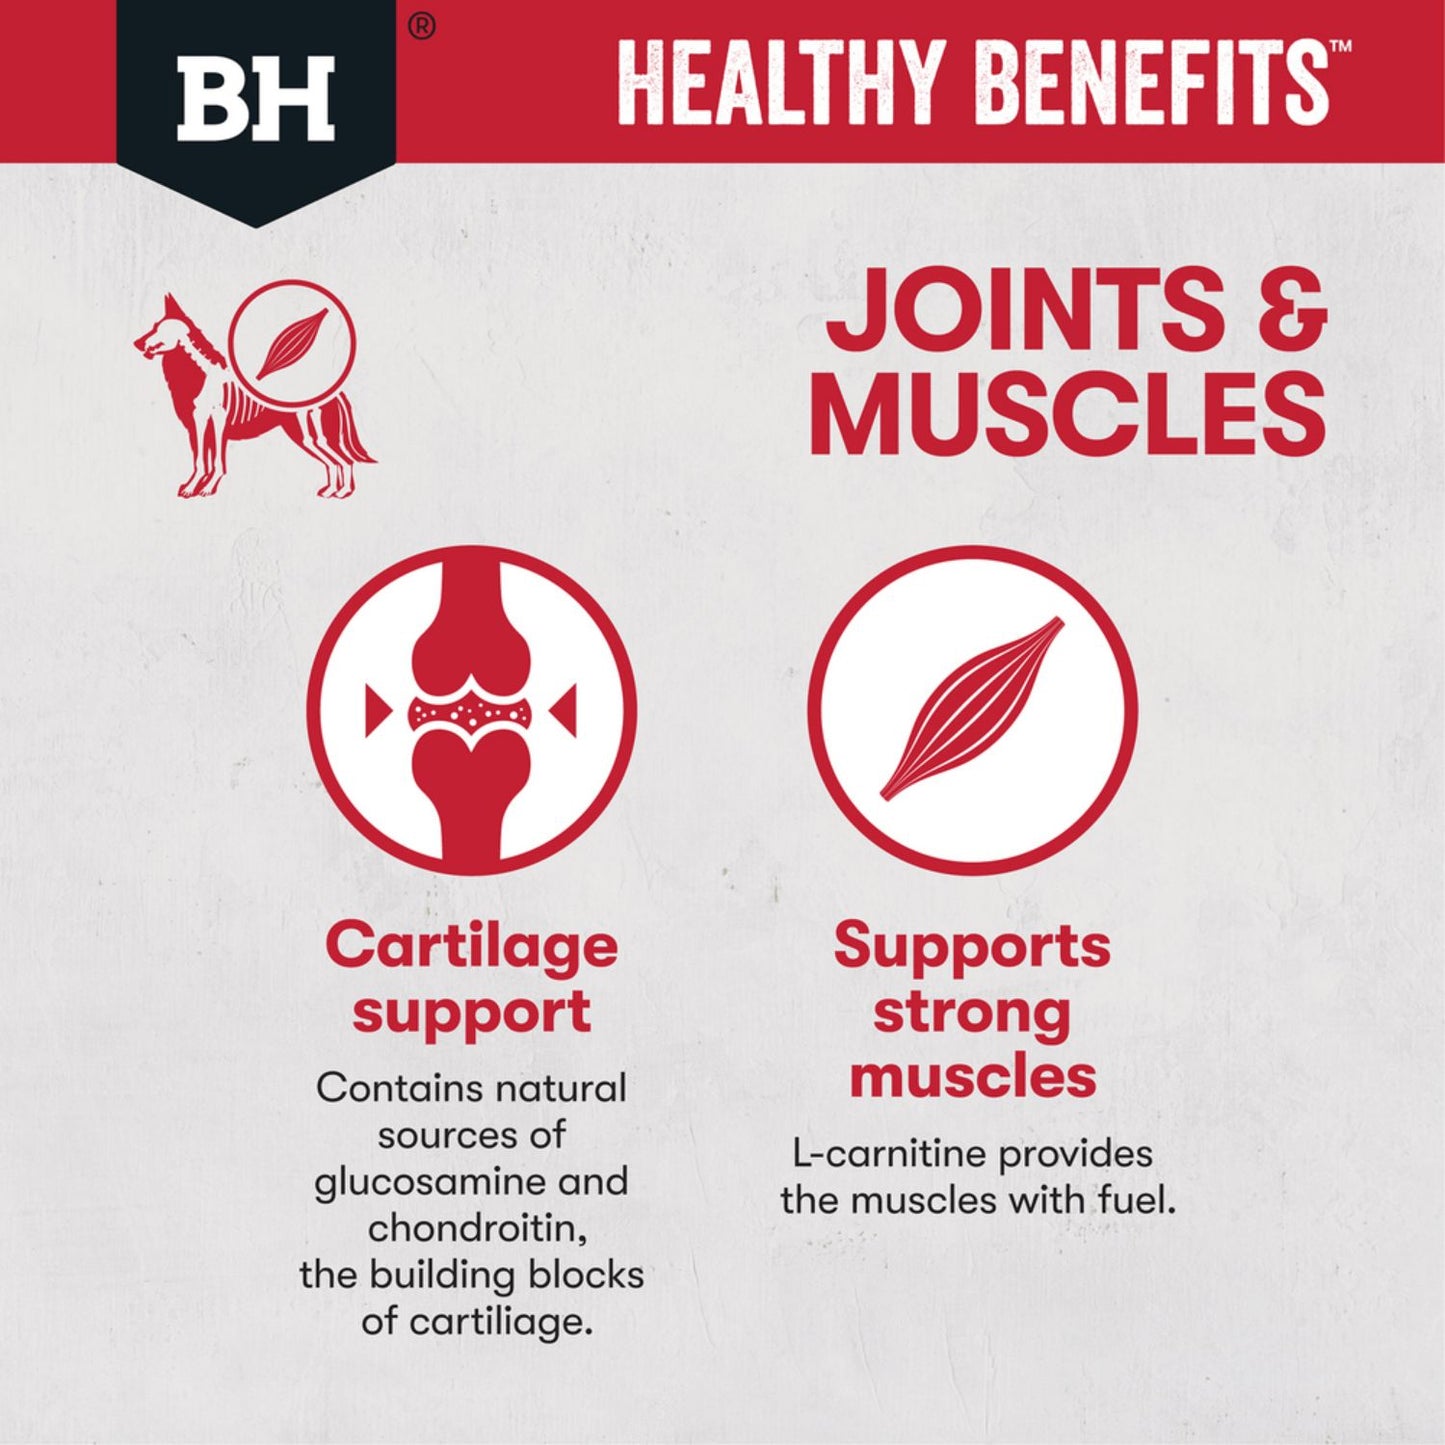 Healthy Benefits Adult Dog Food | Joints & Muscles